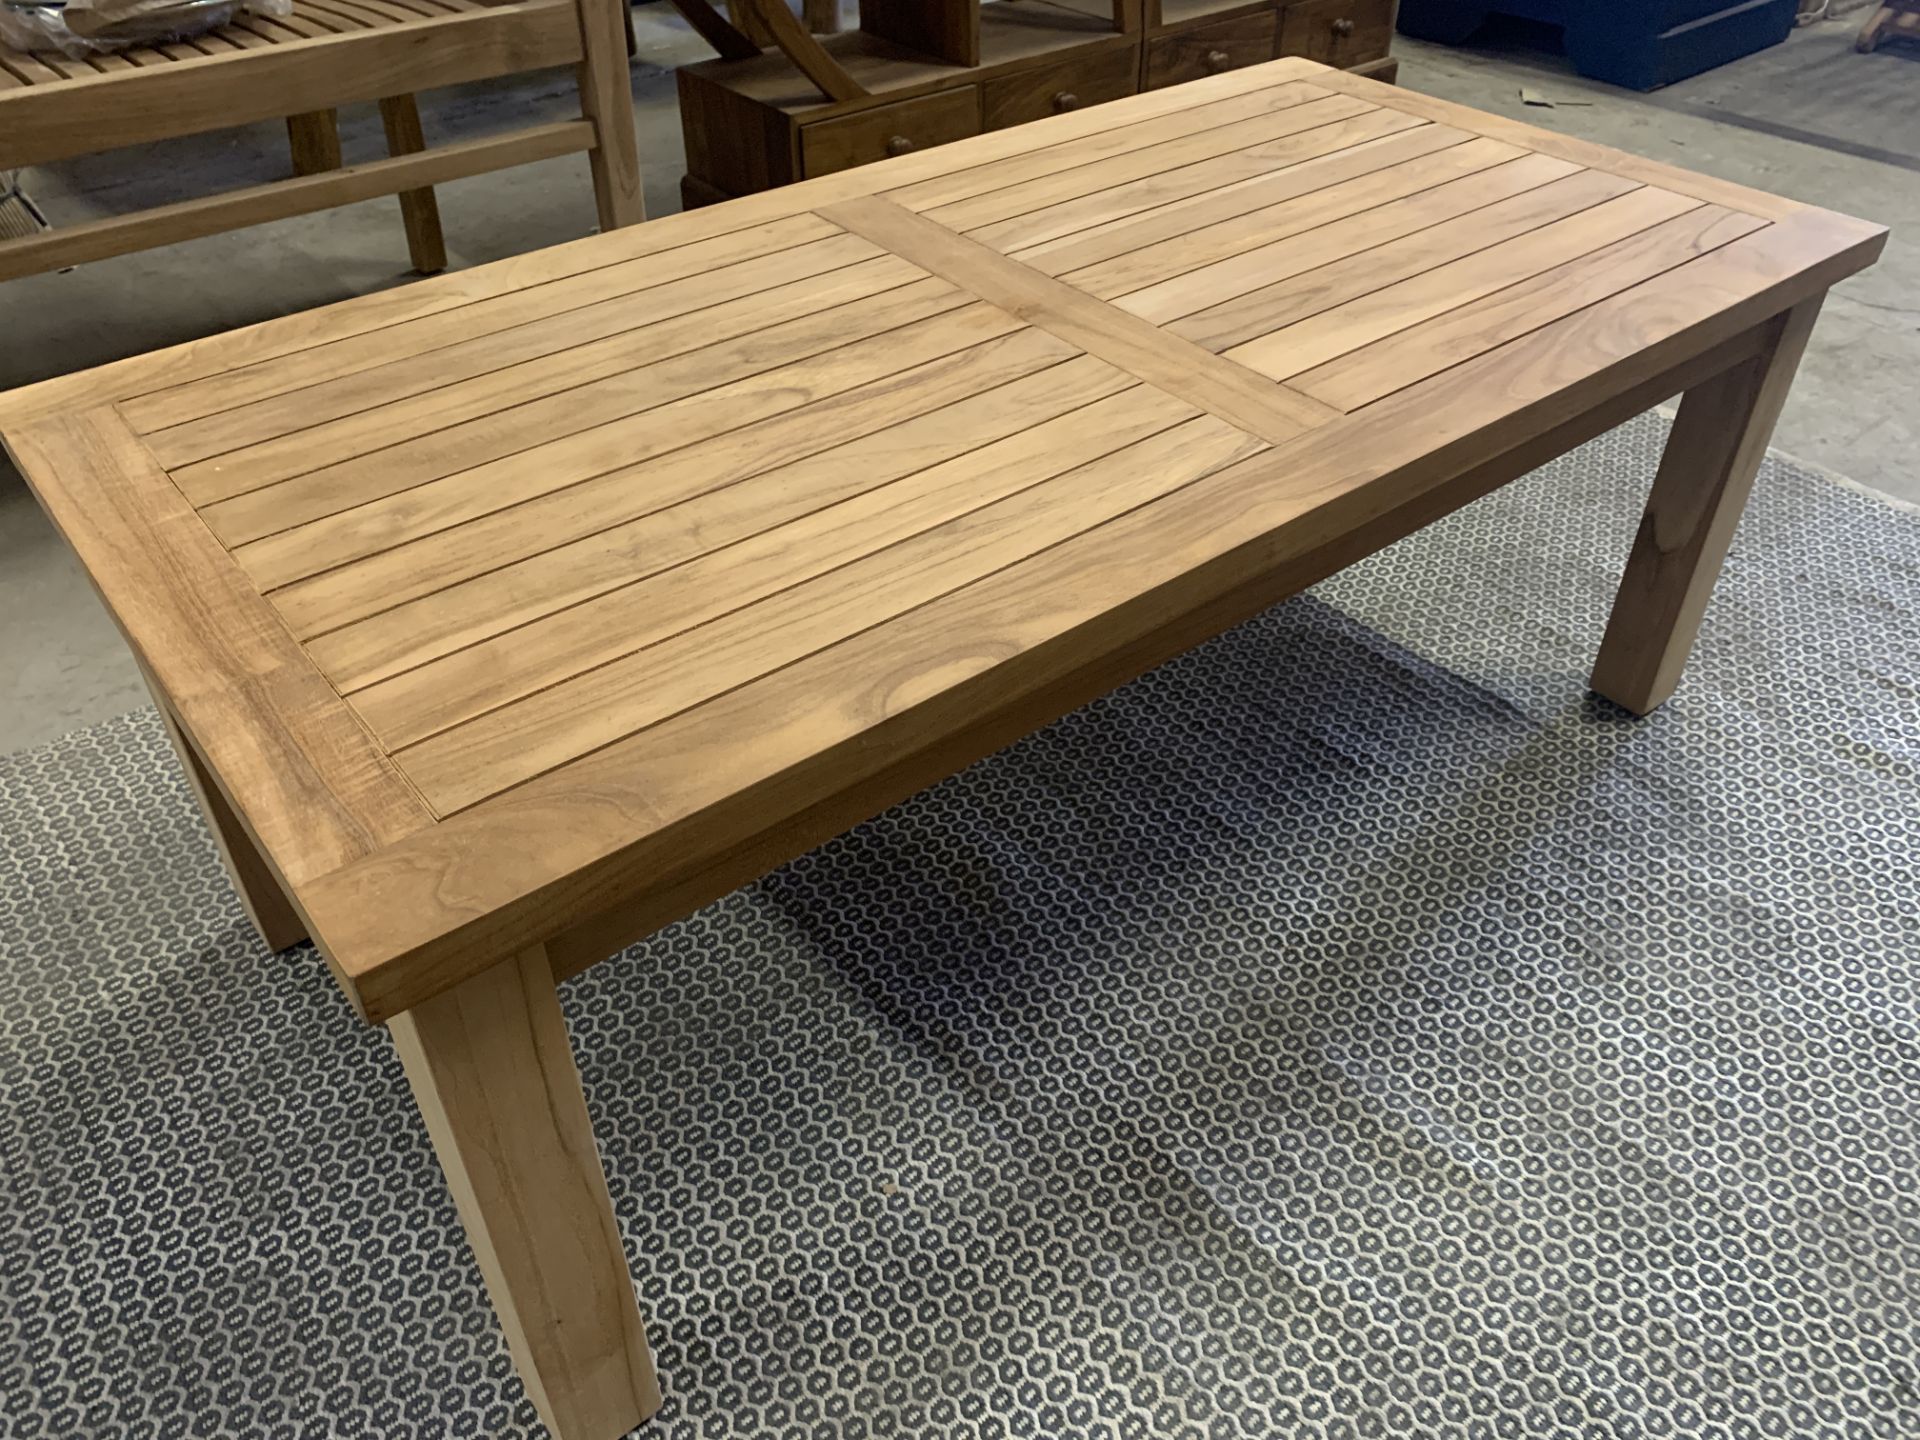 BRAND NEW SOLID WOODEN TEAK RECTA COFFEE TABLE 120 X 60 X 45 RRP £495